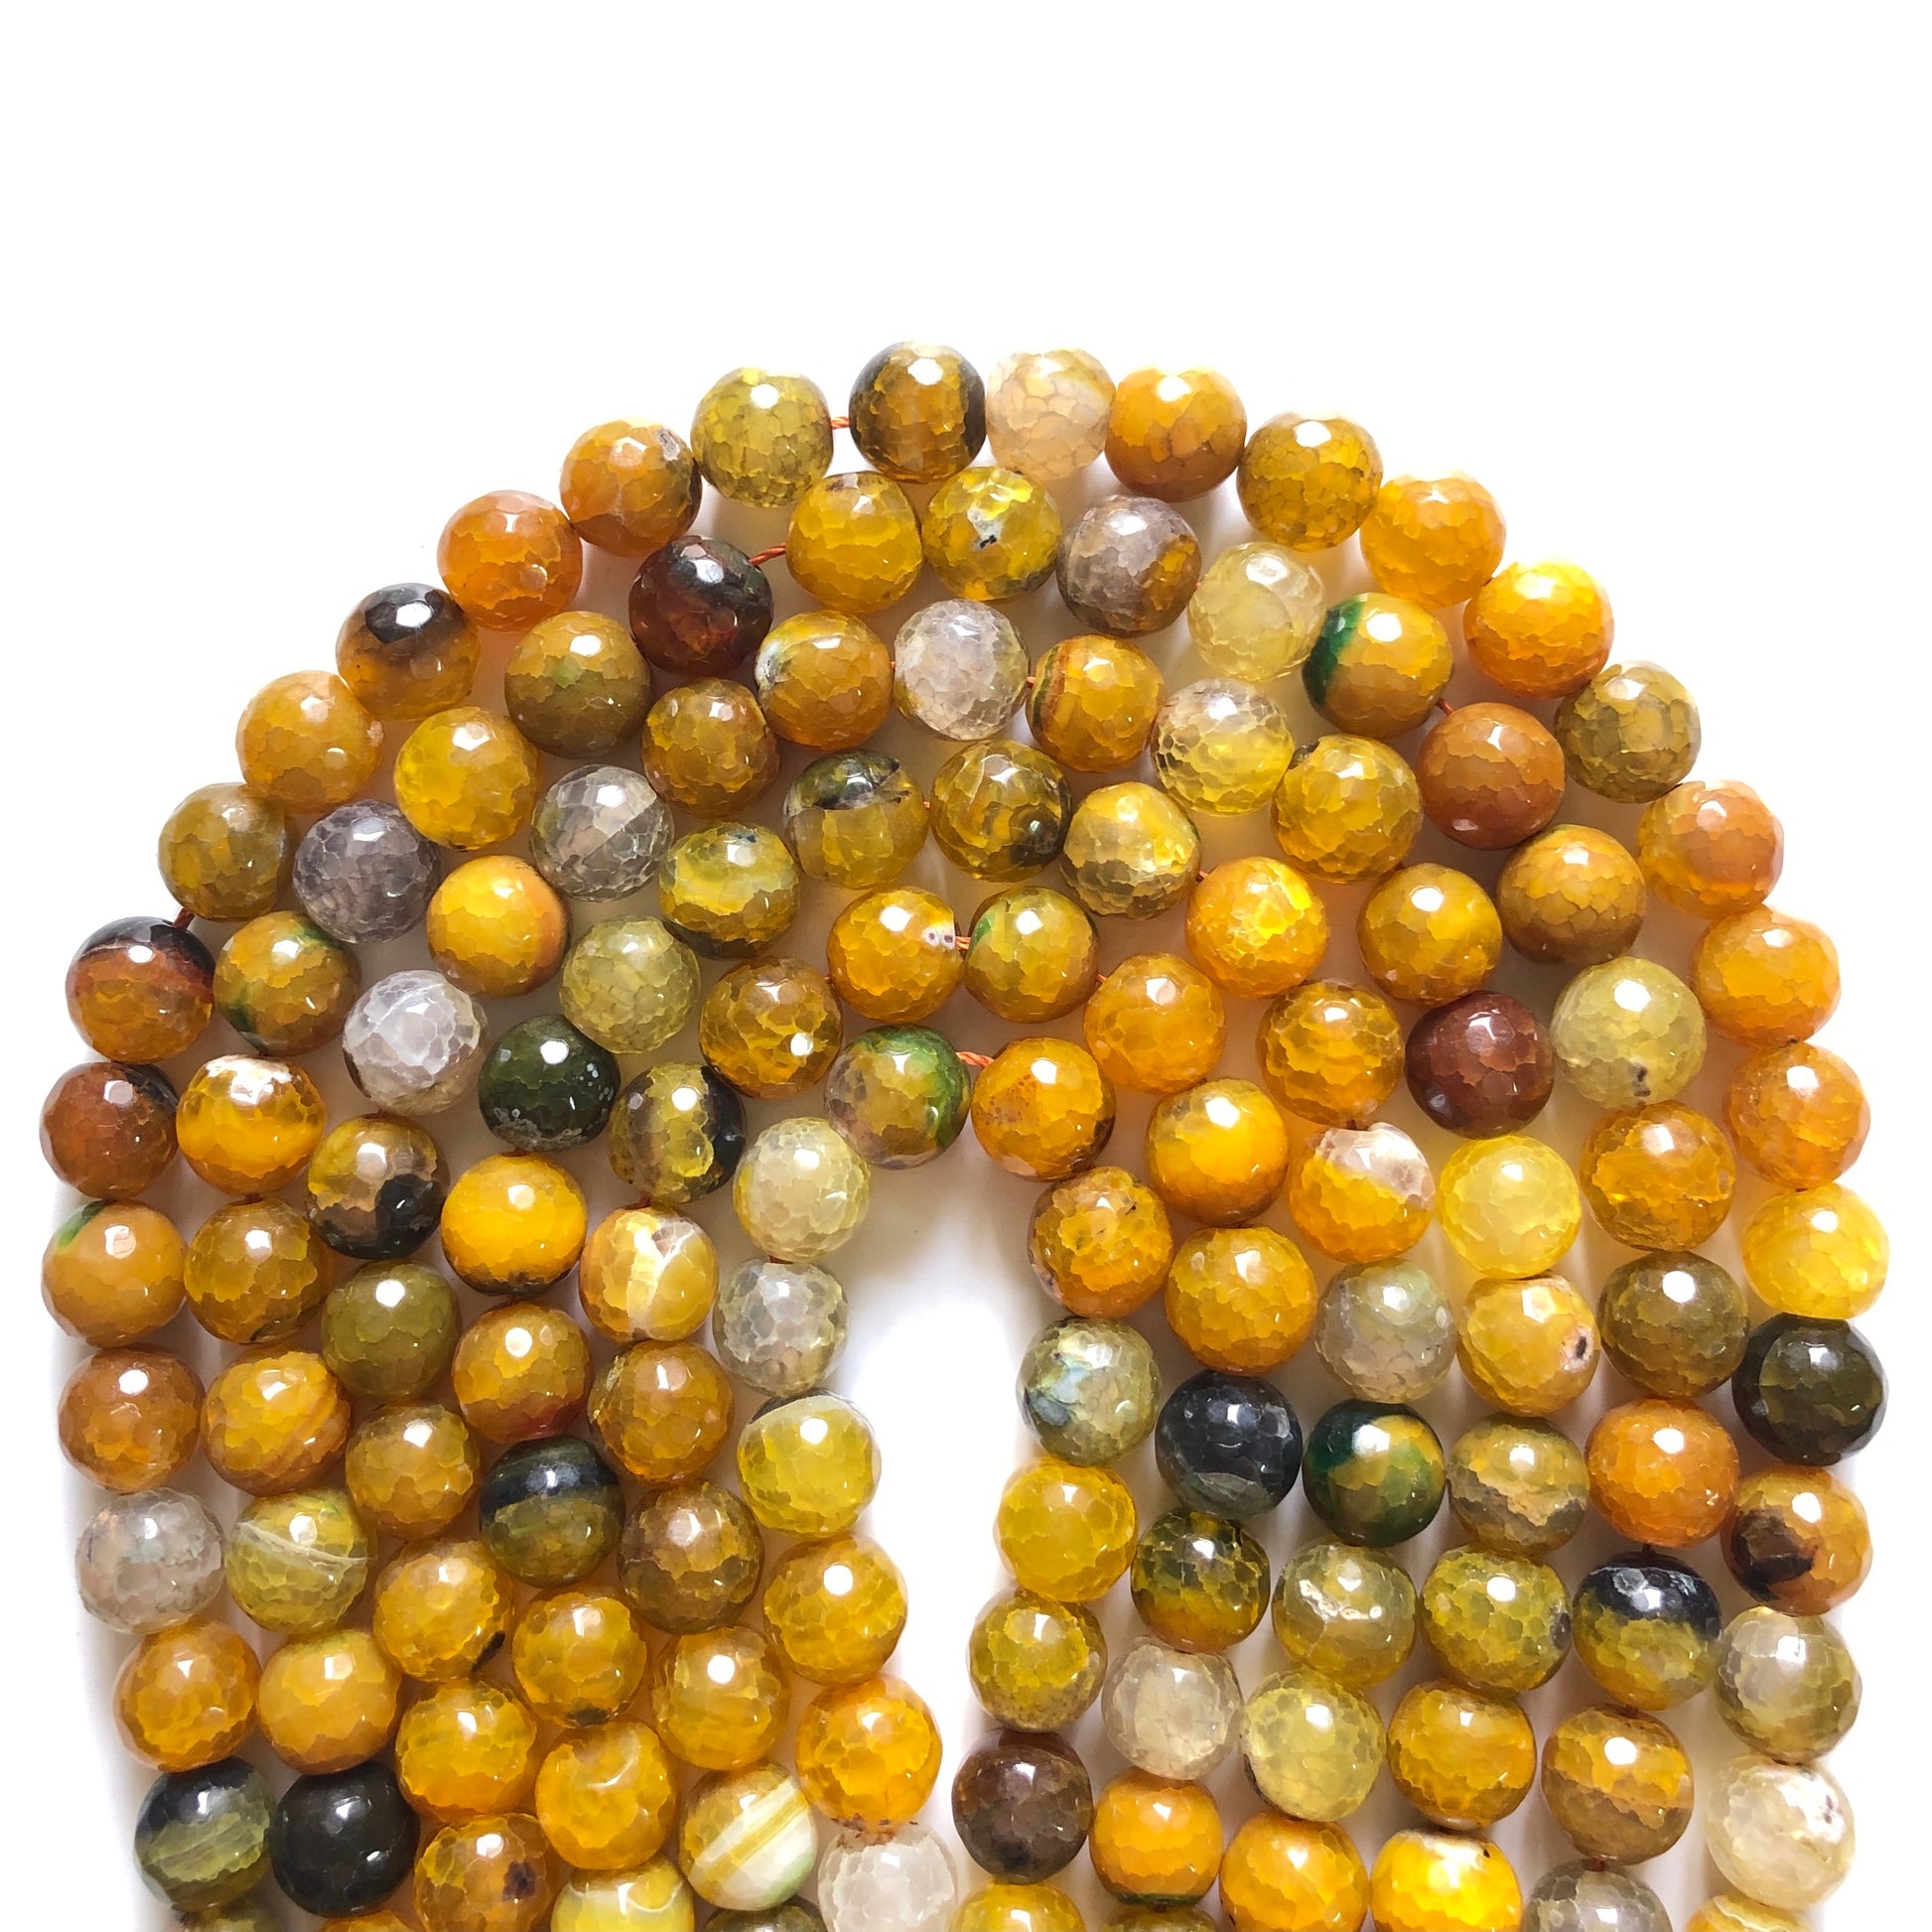 2 Strands/lot 12mm Yellow Faceted Dragon Agate Stone Beads Stone Beads 12mm Stone Beads Faceted Agate Beads Charms Beads Beyond